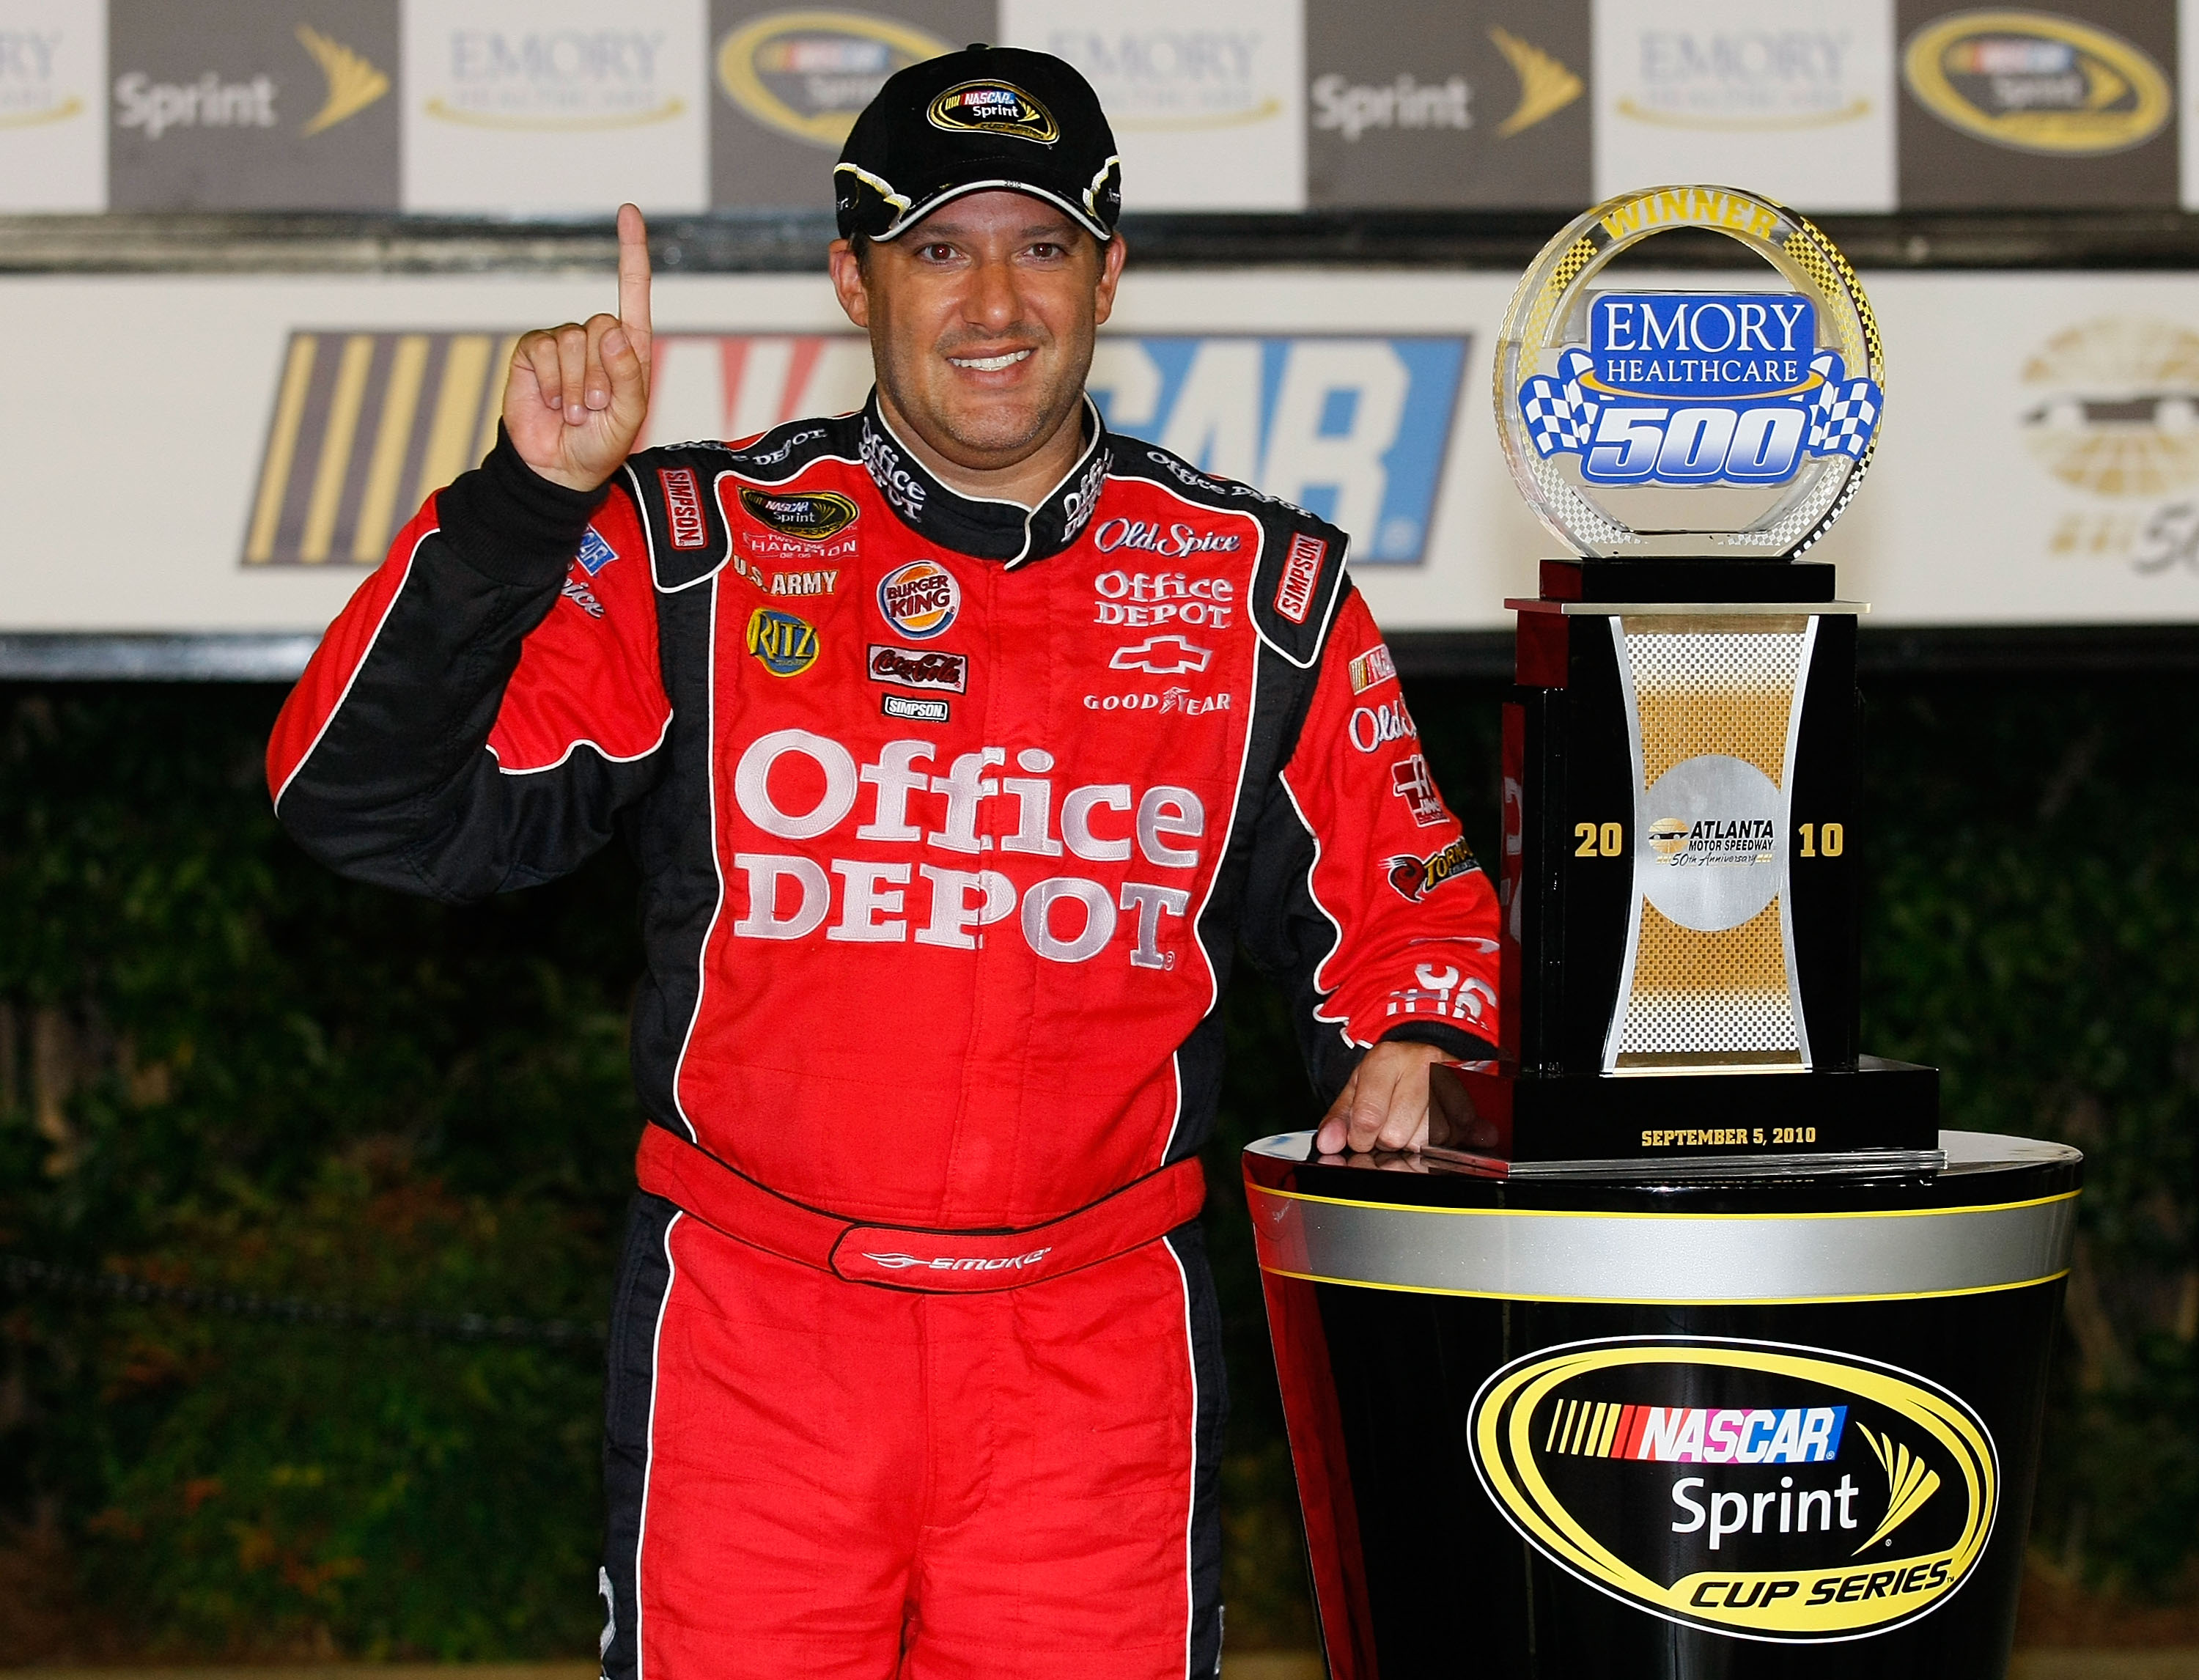 HAMPTON, GA - SEPTEMBER 05: Tony Stewart, driver of the #14 Office Depot/Old Spice Chevrolet, celebrates in victory lane after winning the NASCAR Sprint Cup Series Emory Healthcare 500 at Atlanta Motor Speedway on September 5, 2010 in Hampton, Georgia.  (